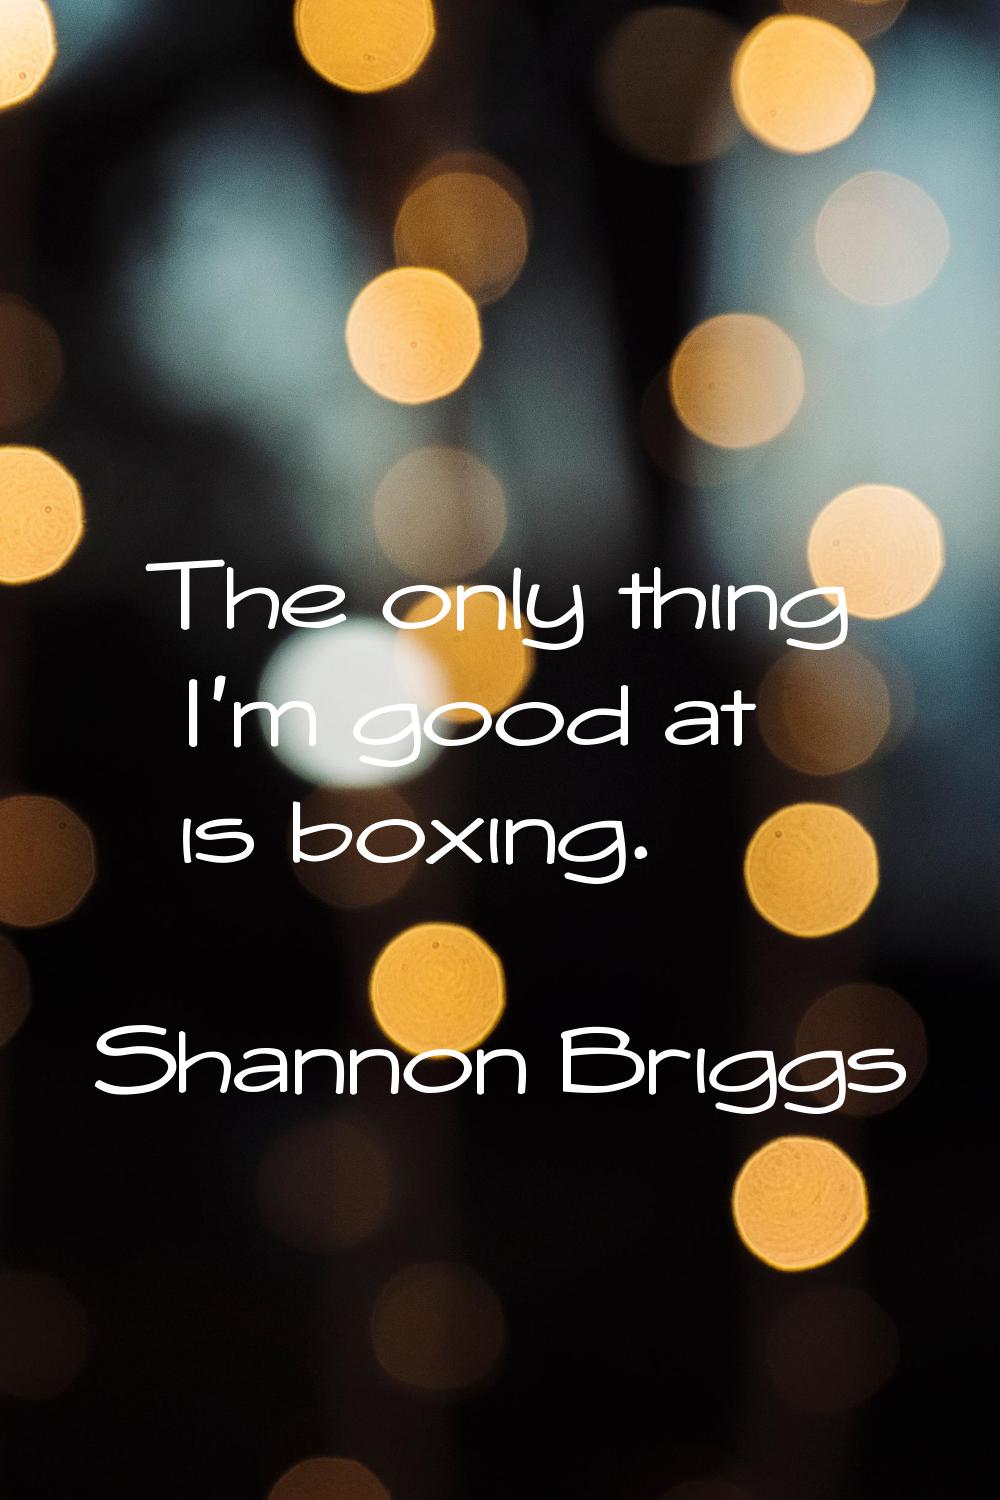 The only thing I'm good at is boxing.